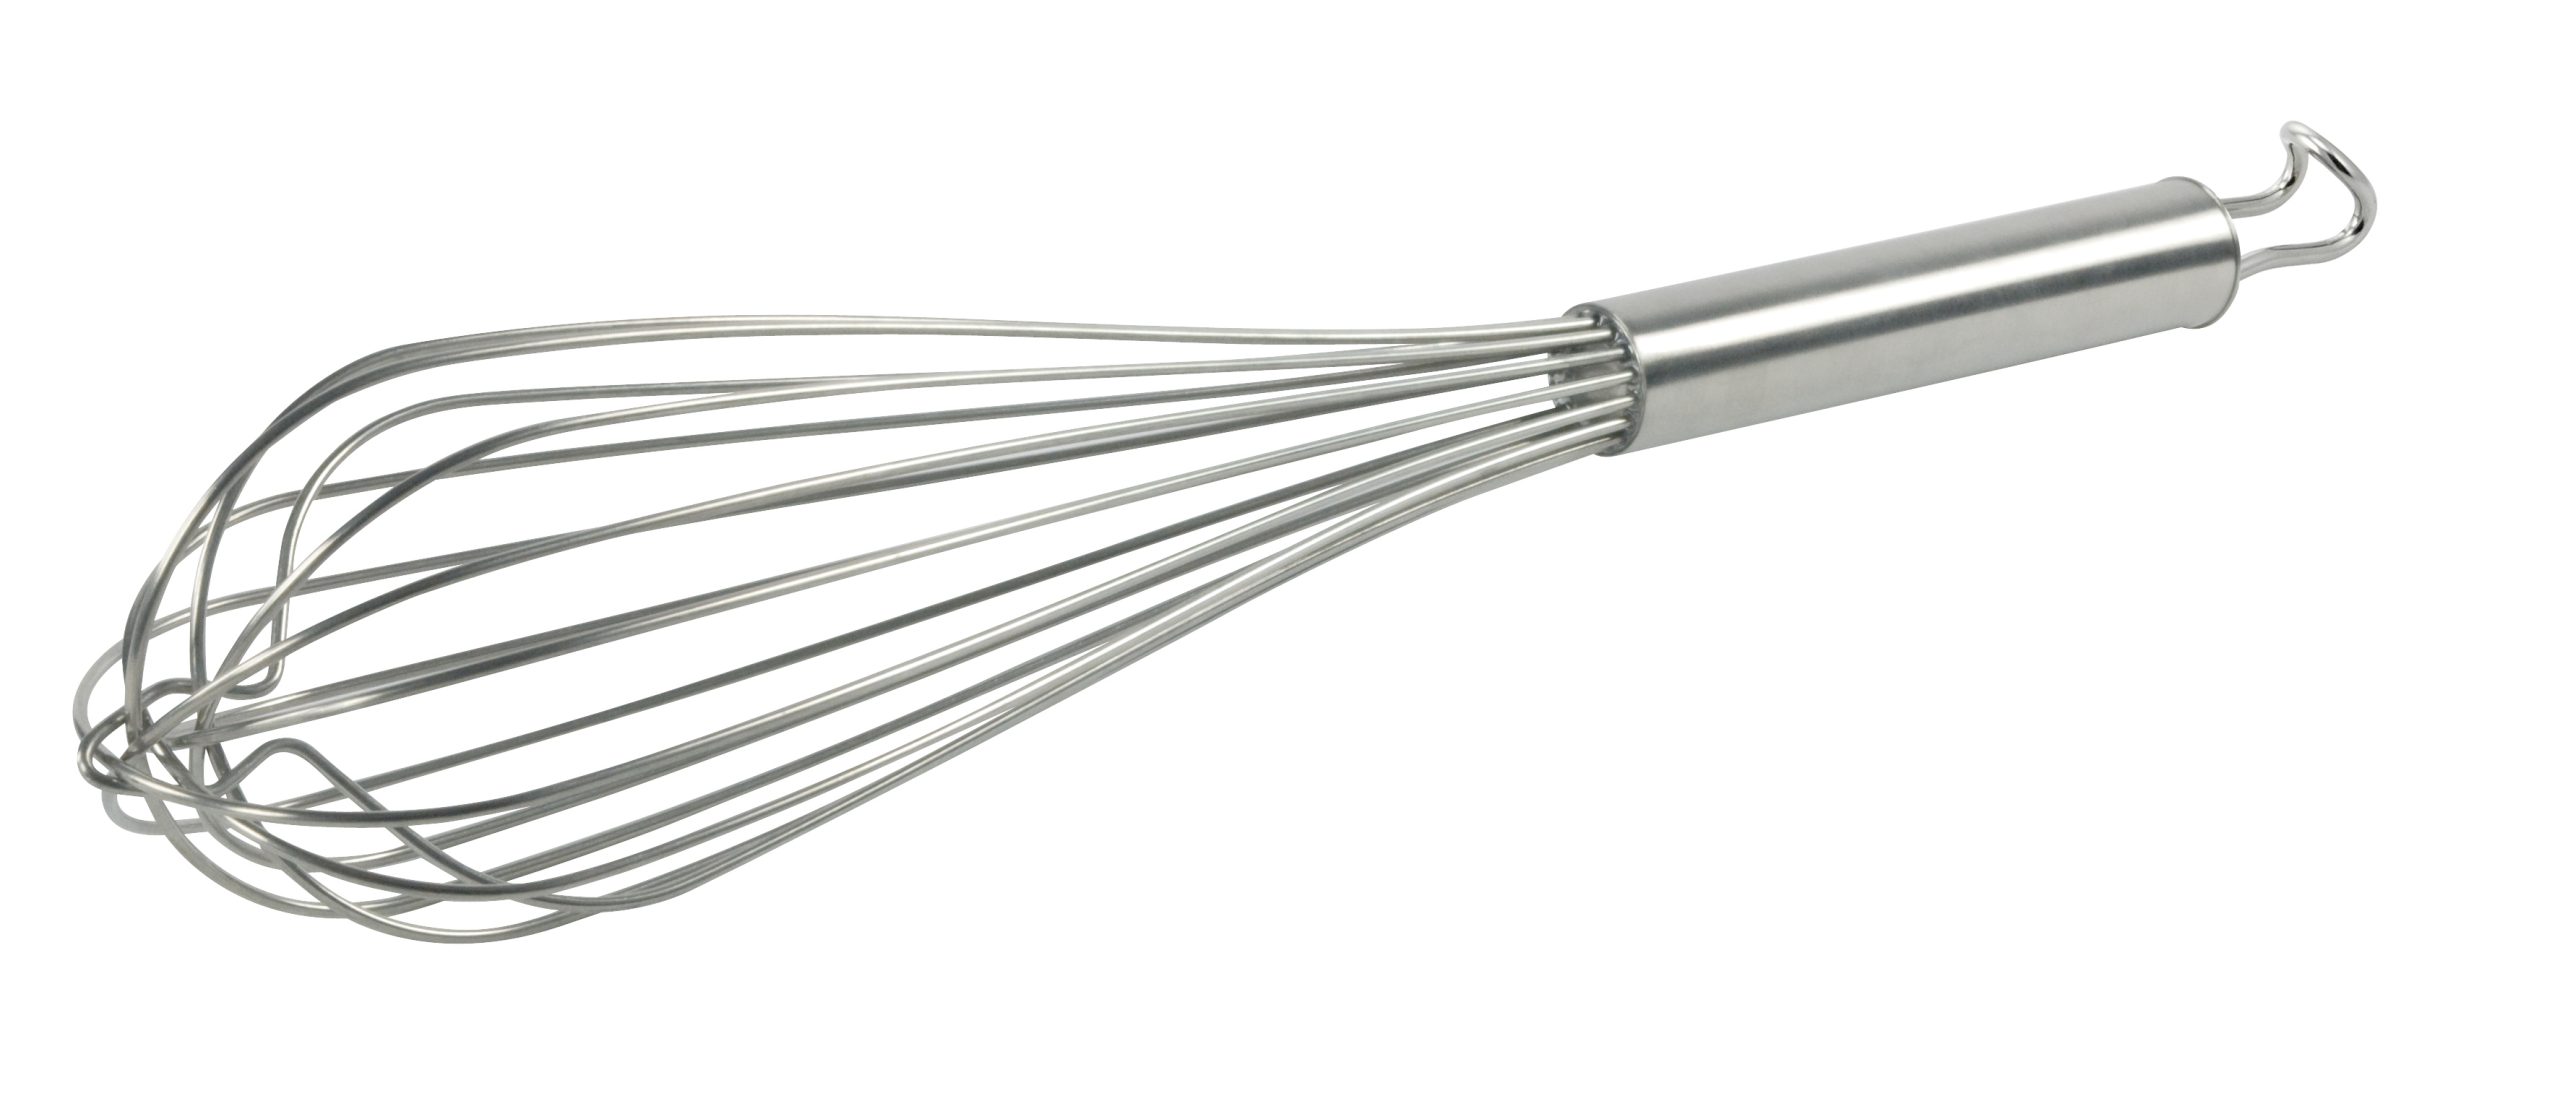 Professional Pastry whisk 30cm/ 8 wires / 1,4 mm - Stainless steel 18/10 ILSA